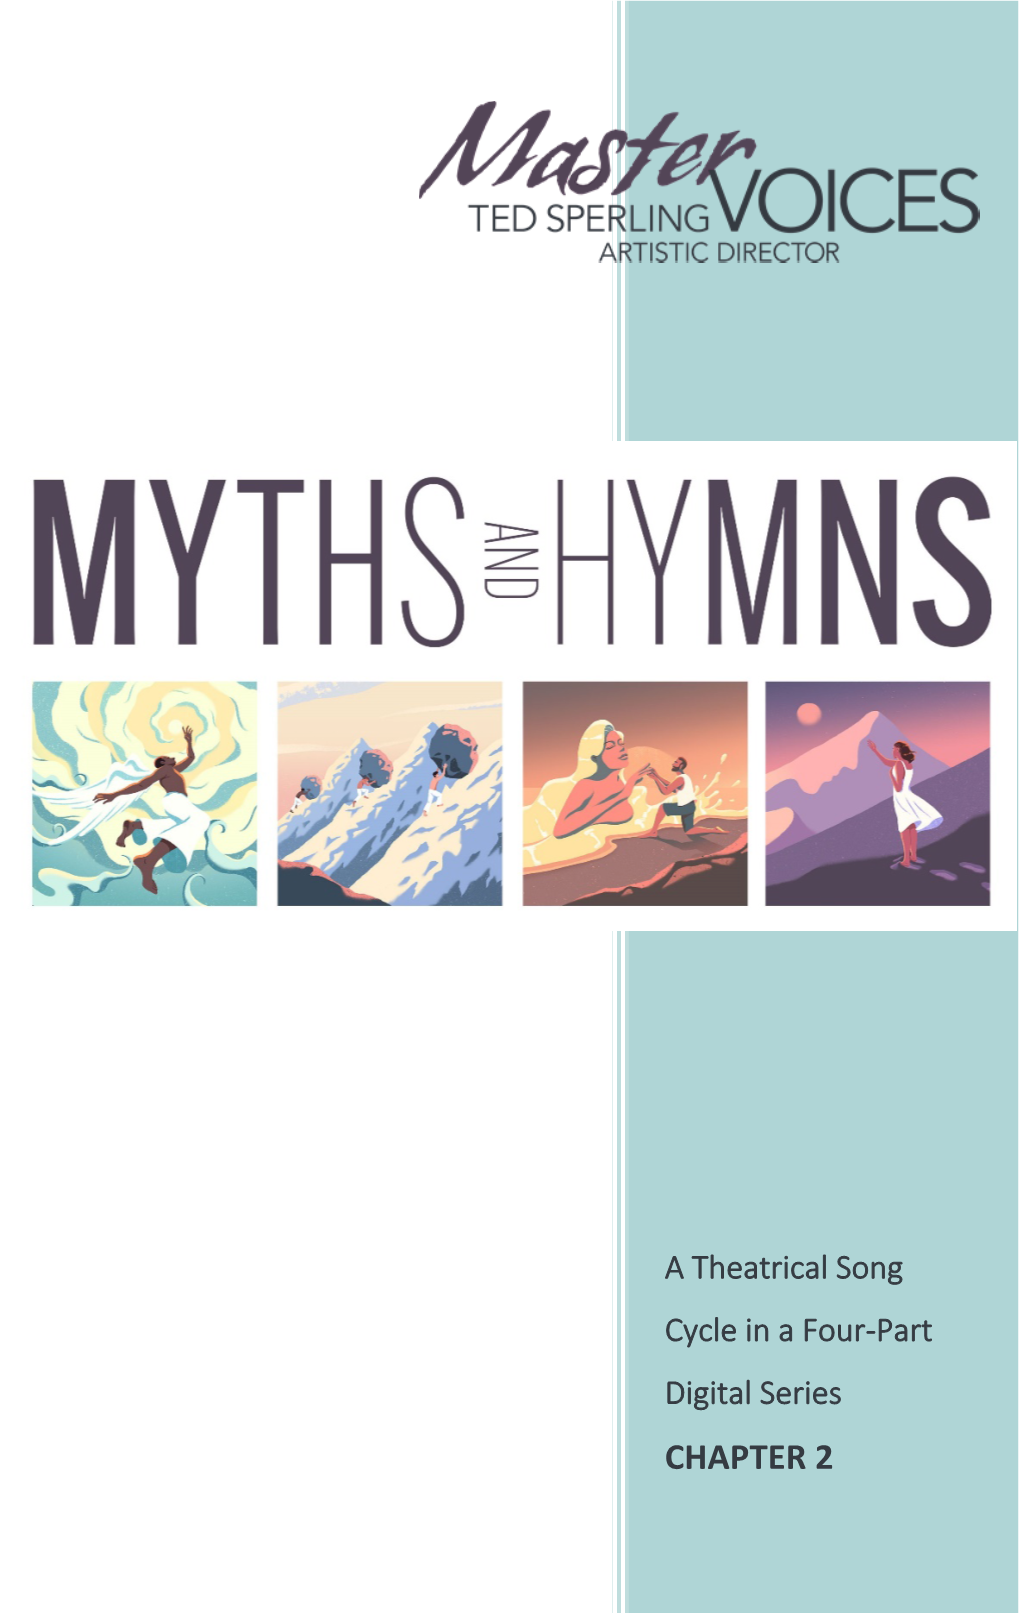 MYTHS and HYMNS Chapter 2: Work